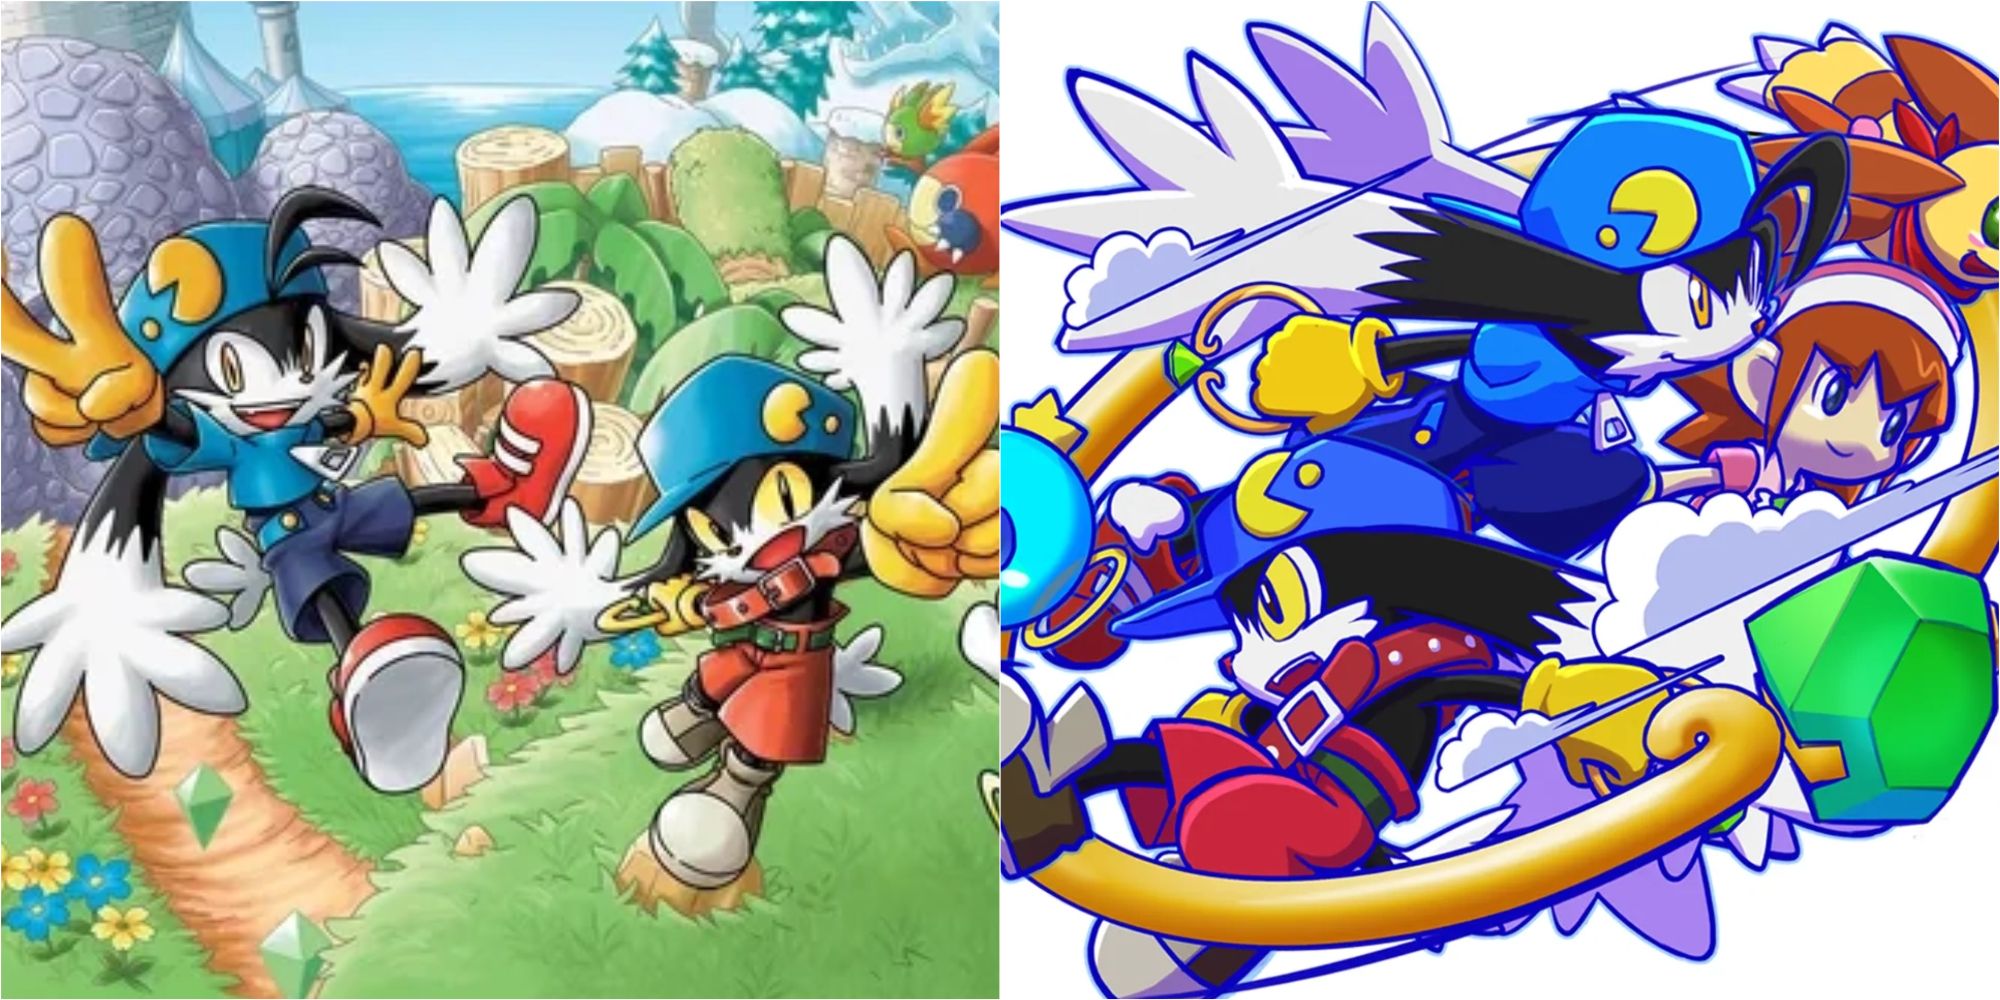 things you didn't know about klonoa featured image